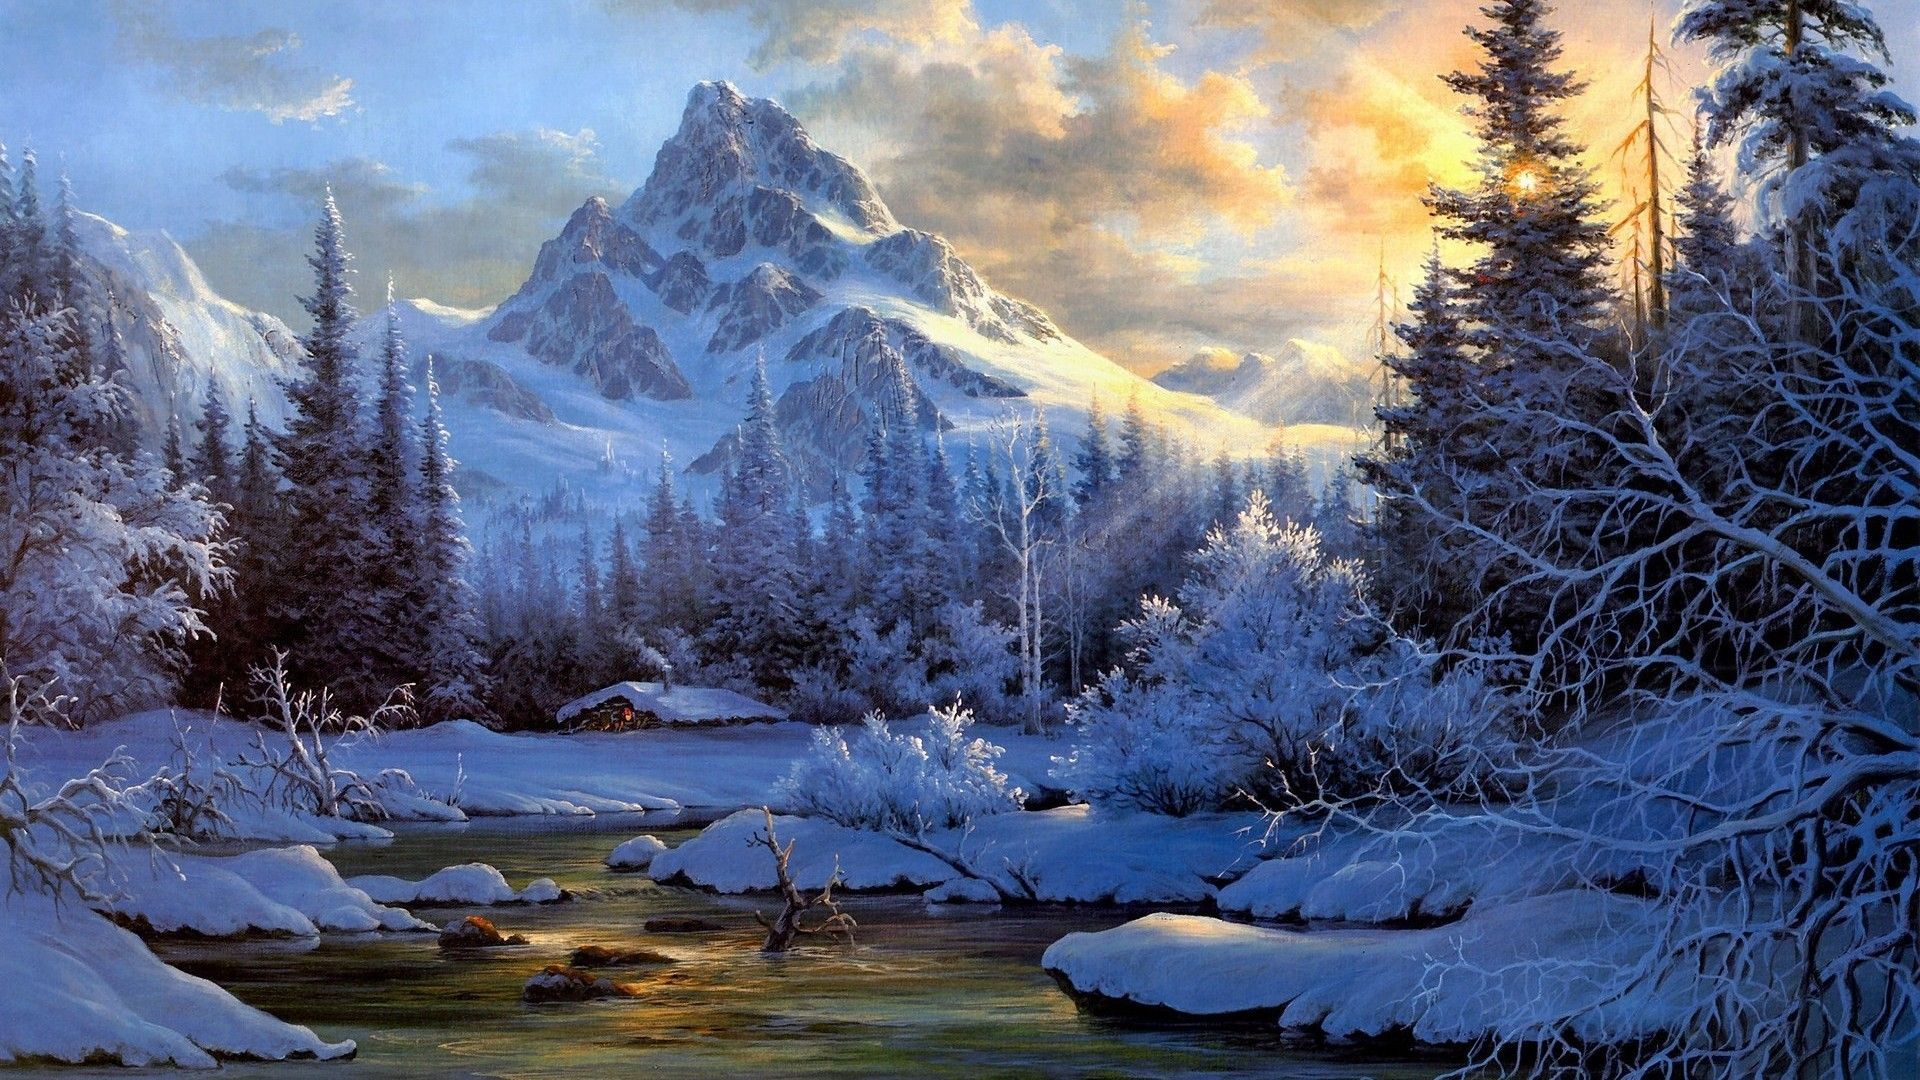 Winter Paintings With Snow. Mountain landscape painting, Winter landscape, Winter scenery